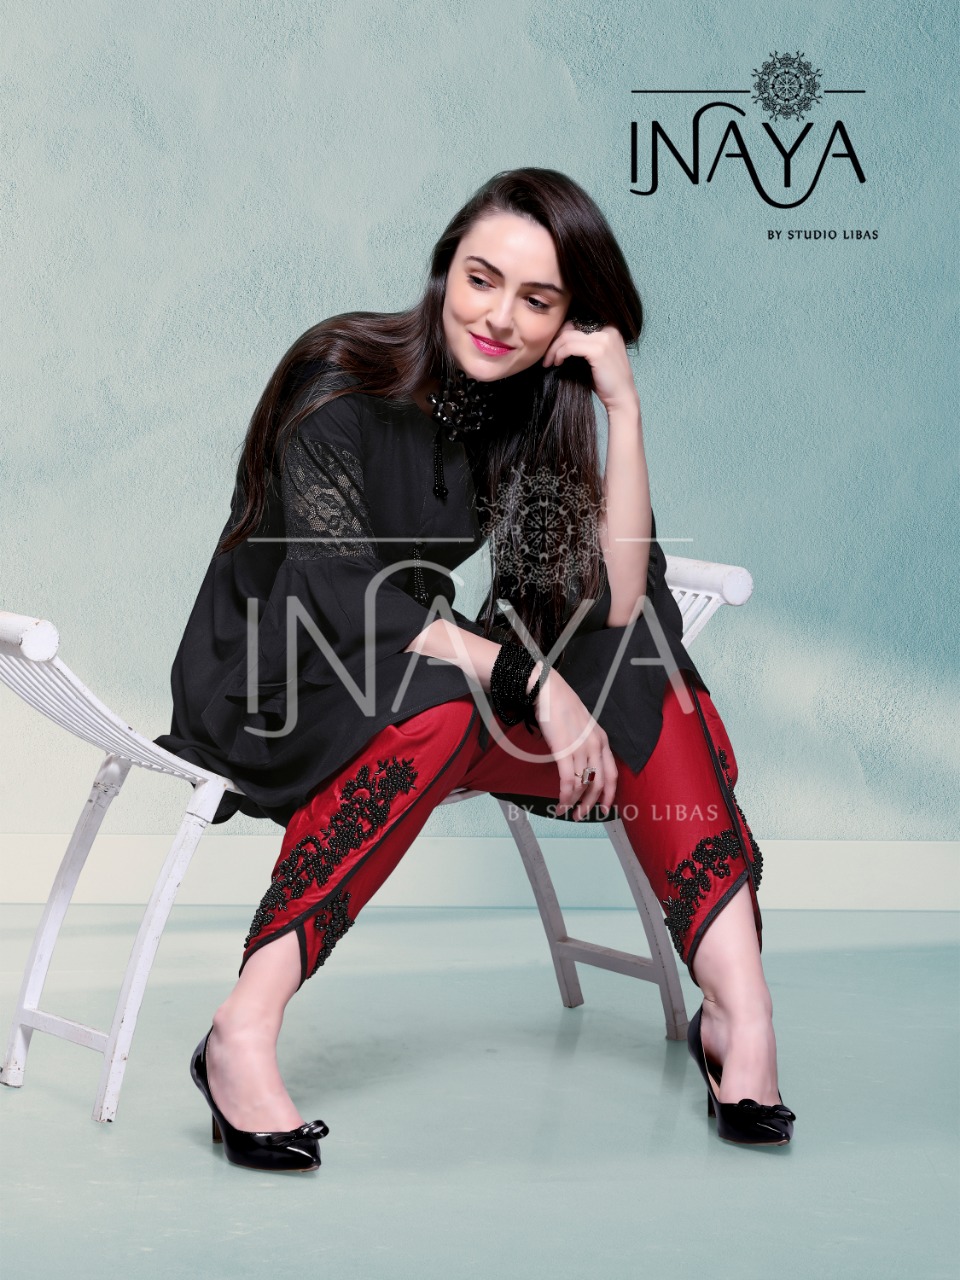 Inaya by studio libas presents luxury pret collection 7 Special designer festive collection of kurti style tunic with culottes pants concept